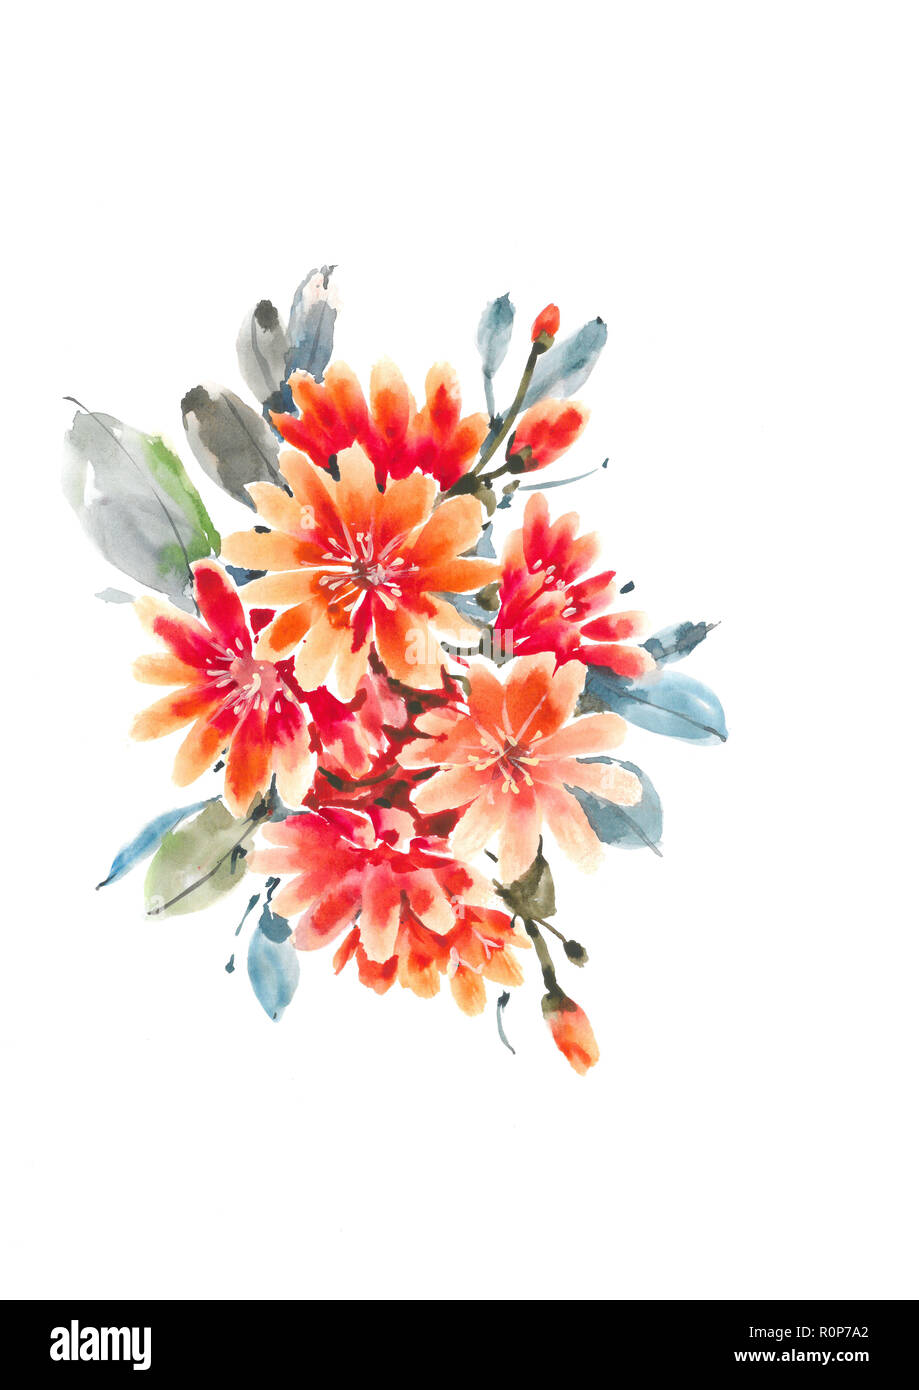 Blooming Lewisia.  Decorative bouquet with orange Lewisia. Watercolor background. Stock Photo